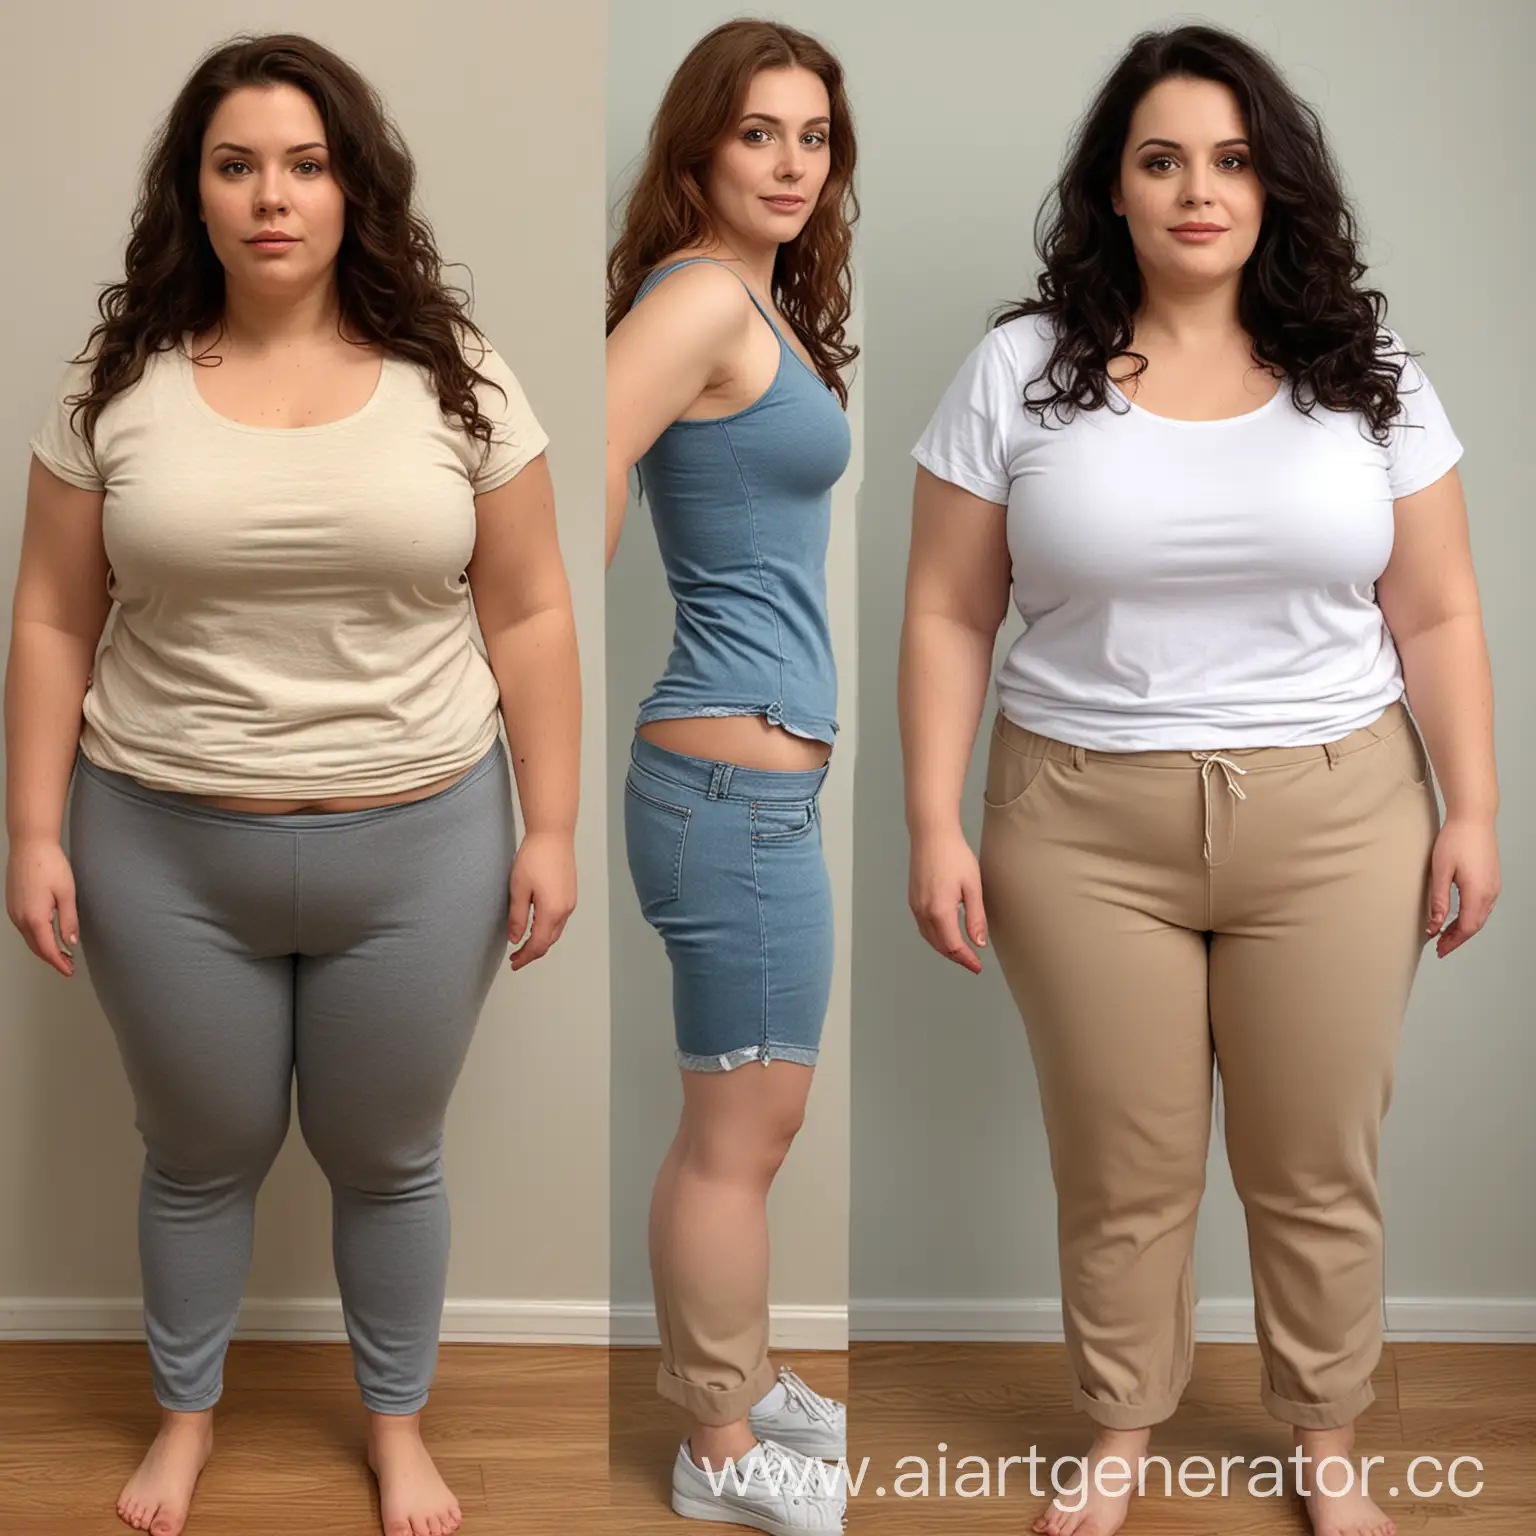 Realistic-Collage-of-Weight-Loss-Before-and-After-in-Same-Clothes